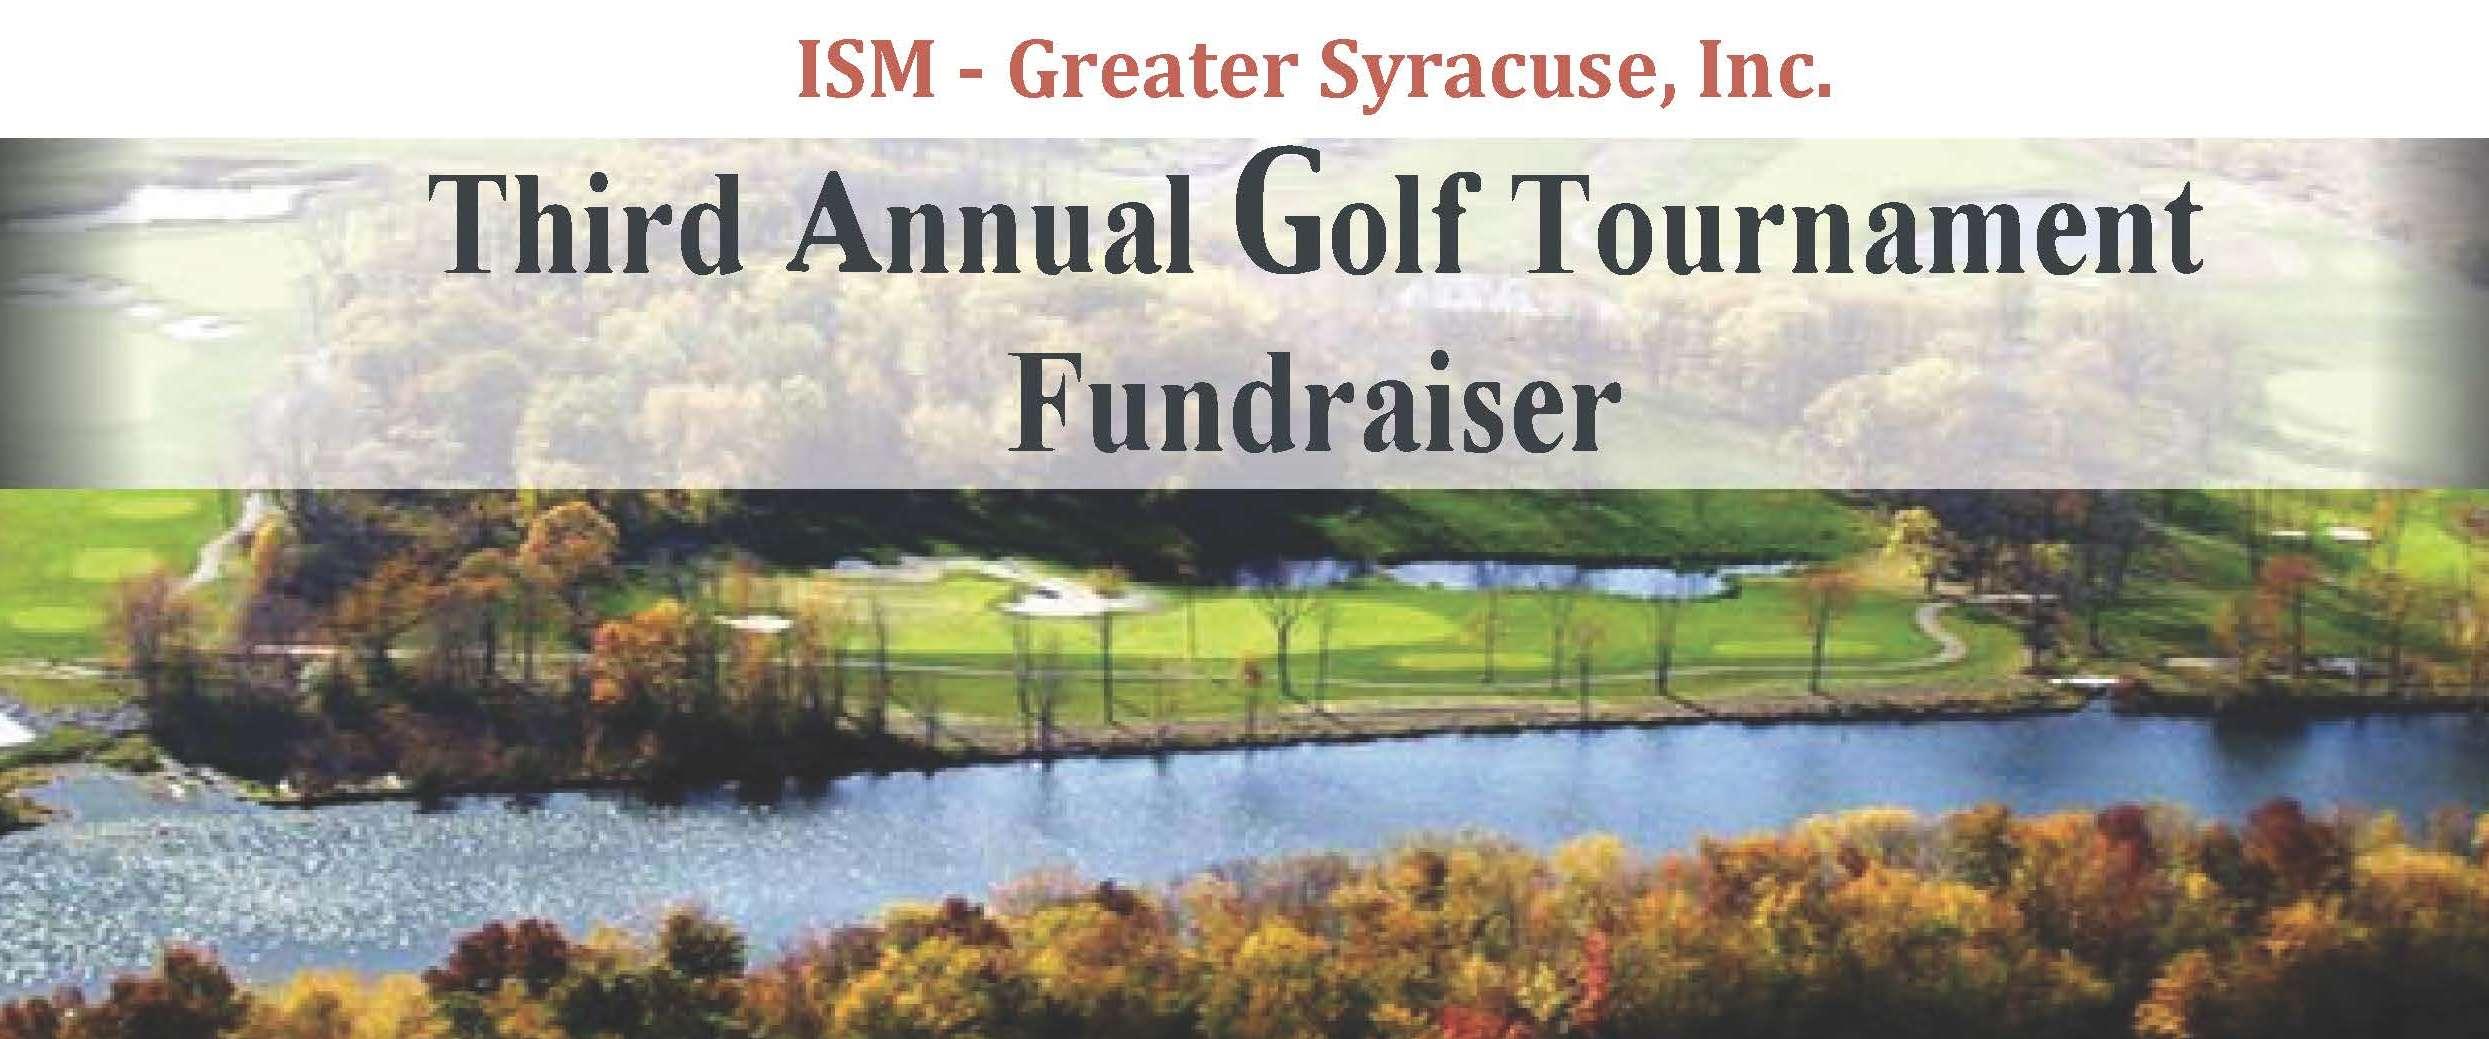 ISM Greater Syracuse 3rd Annual Fundraiser Golf Tournament